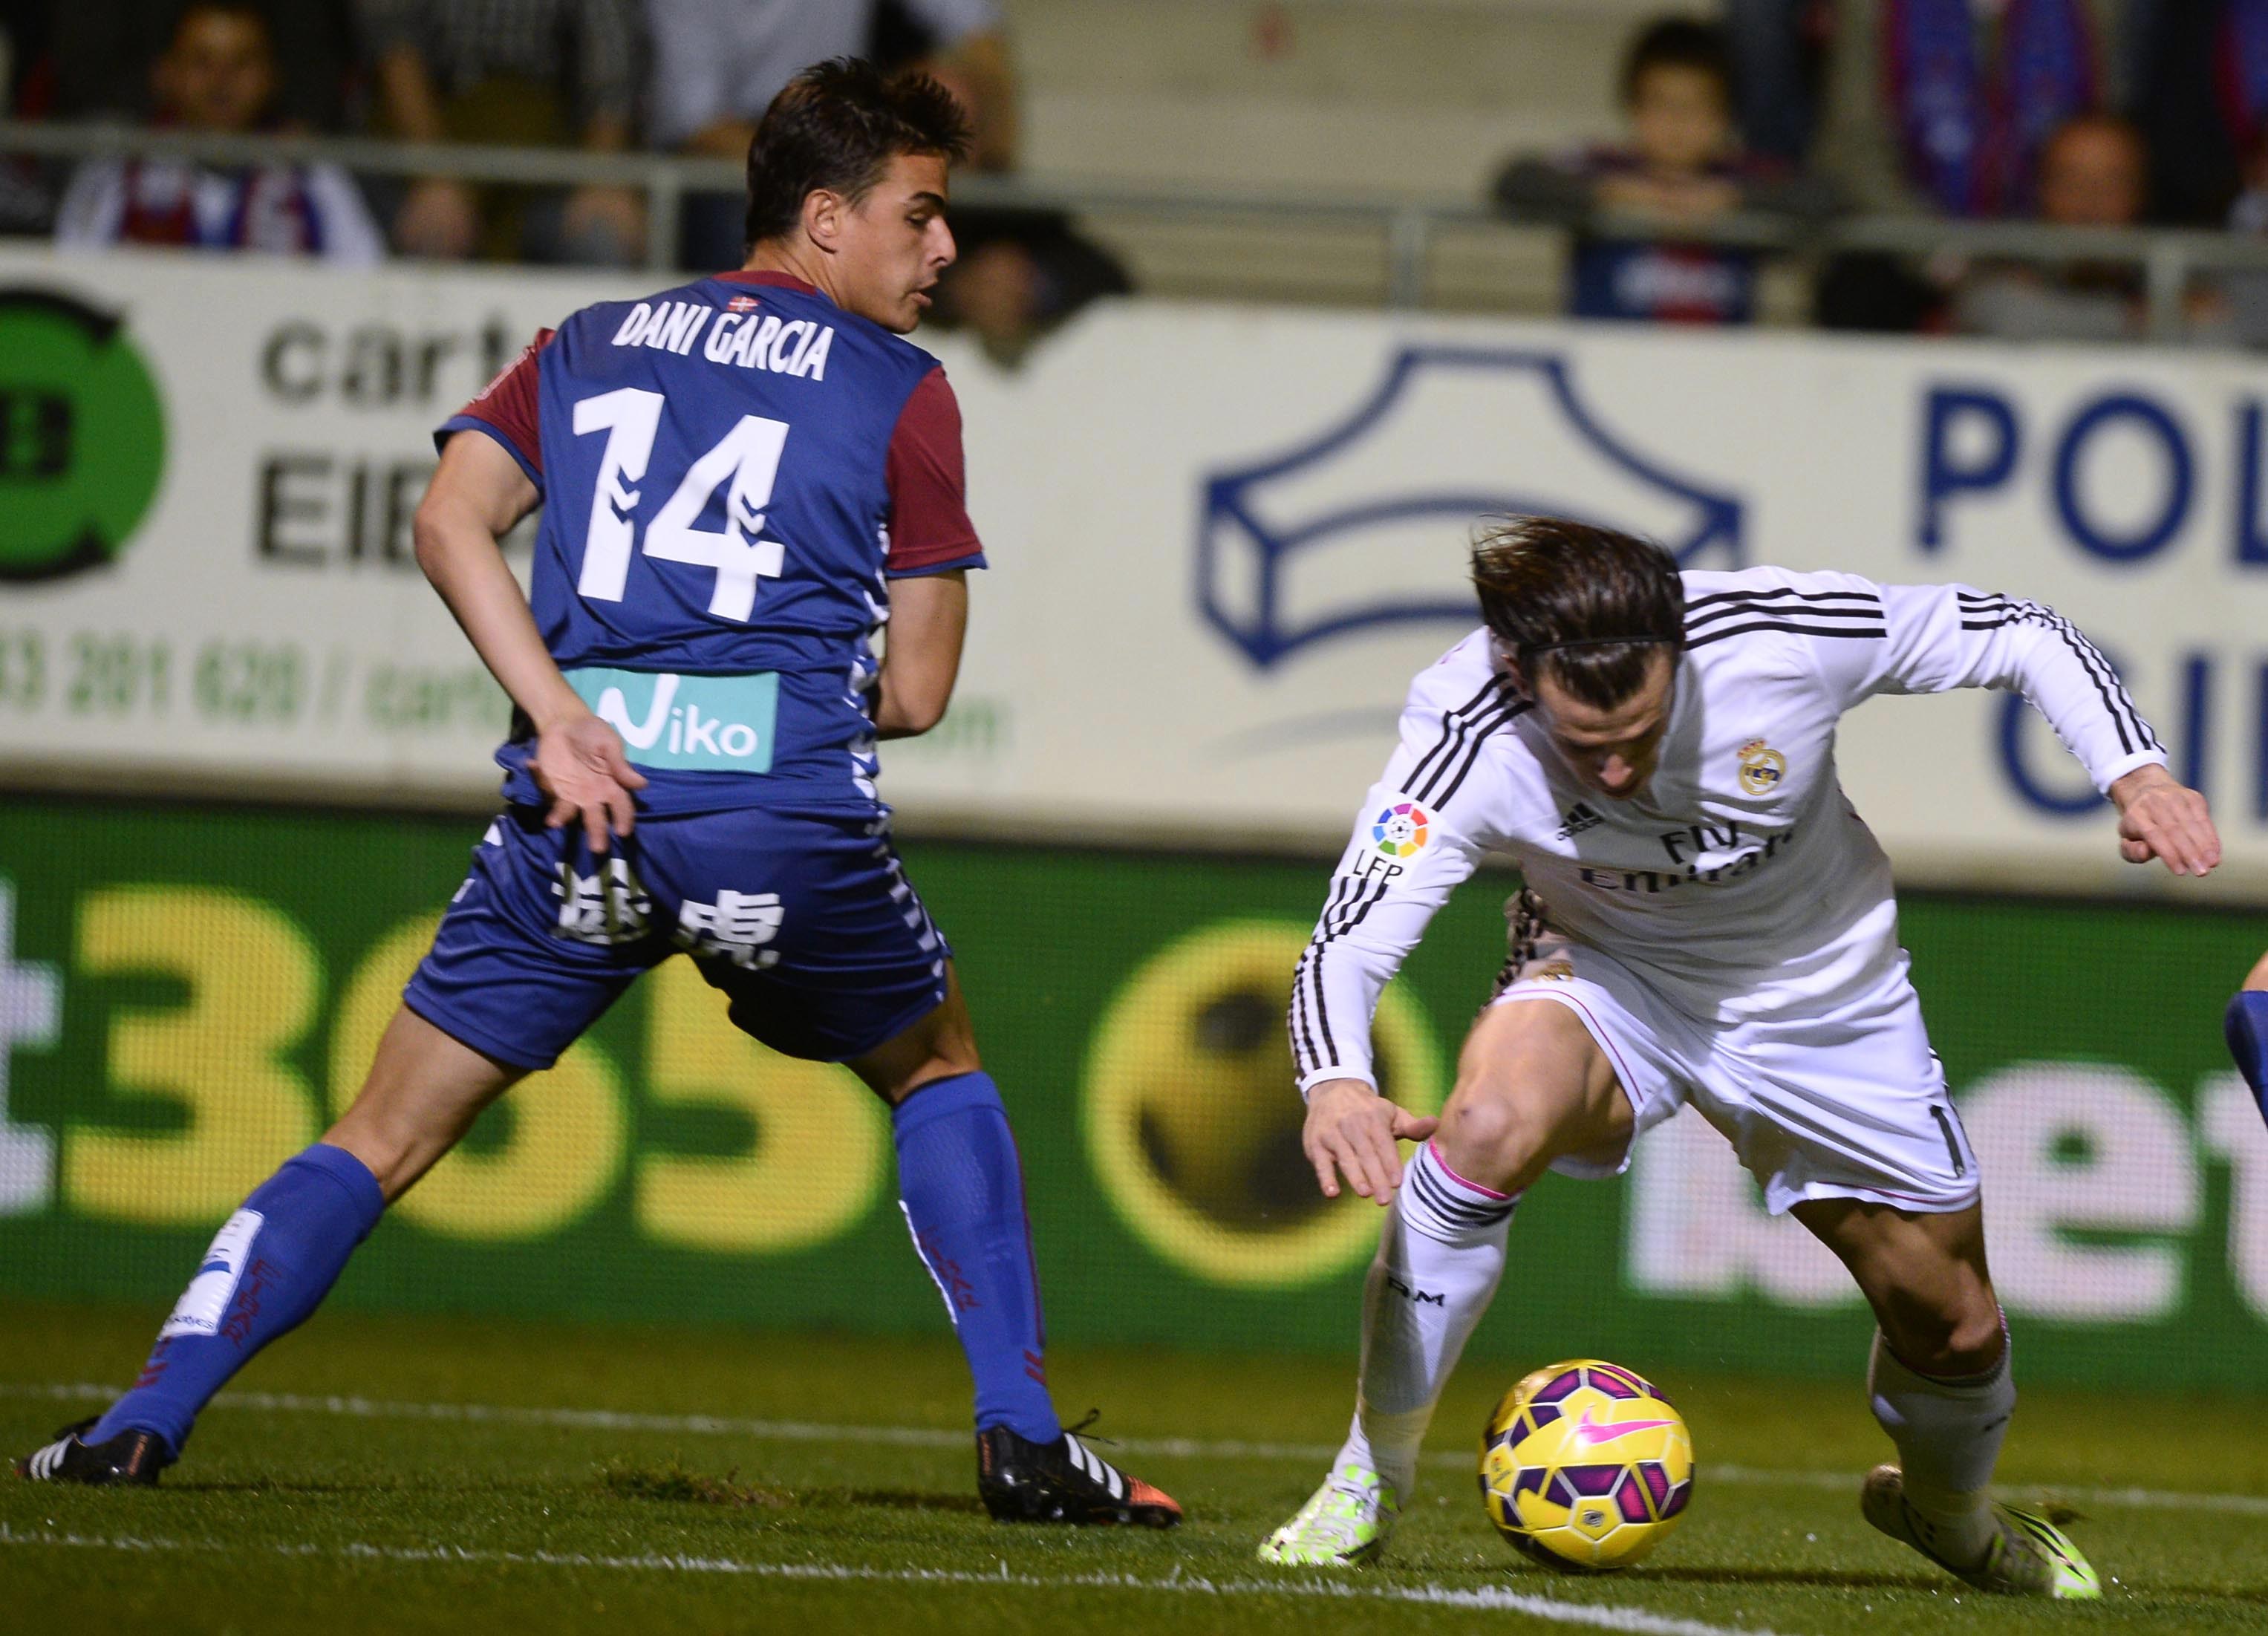 Real Madrid's Gareth Bale (R) fights for the ball with Eibar's Dani Garcia during their Spanish first division soccer match at Ipurua stadium in Eibar November 22, 2014. REUTERS/Vincent West (SPAIN - Tags: SPORT SOCCER)